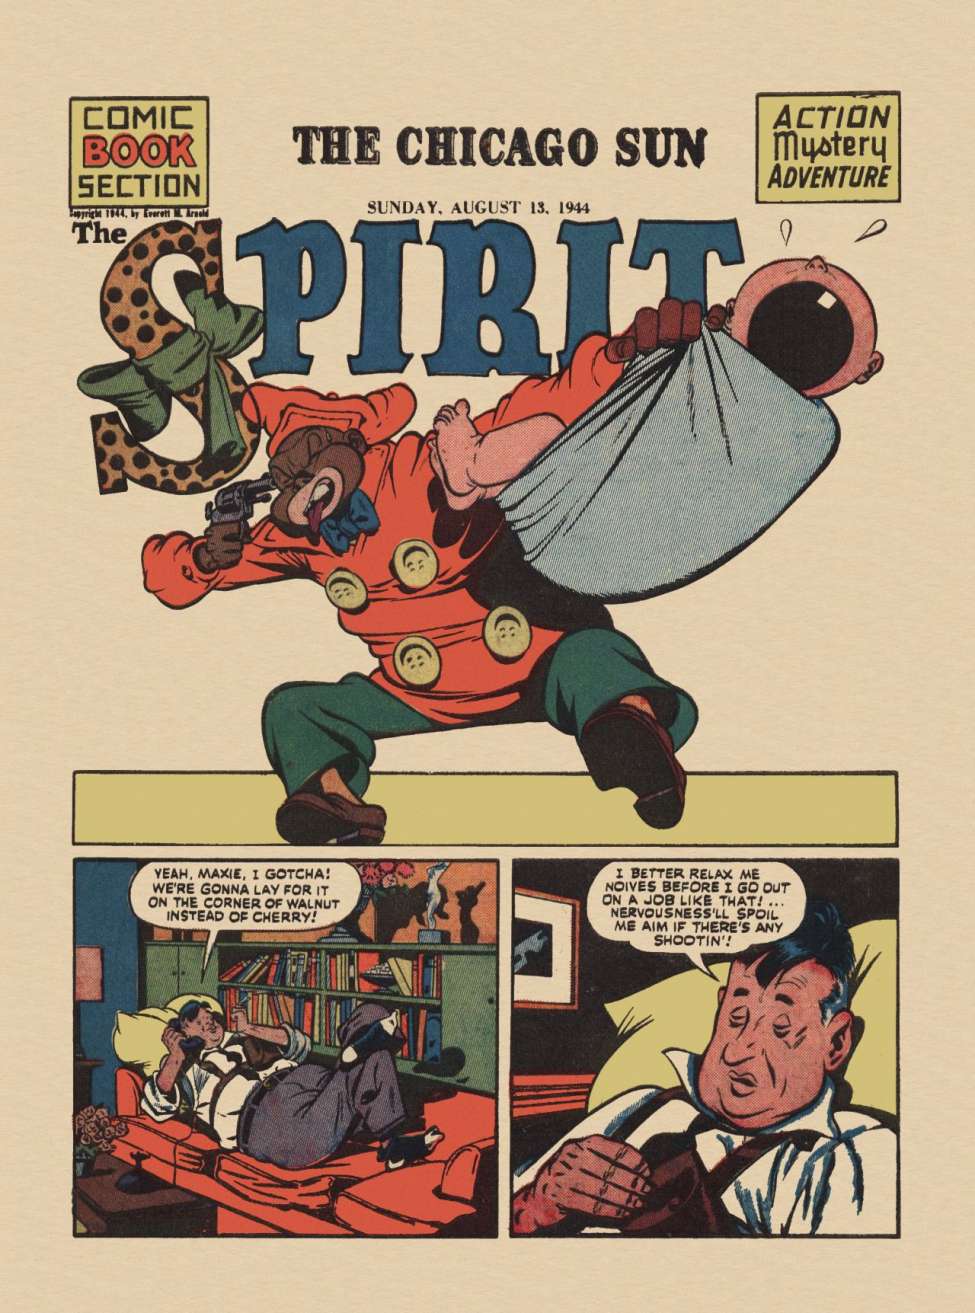 Book Cover For The Spirit (1944-08-13) - Chicago Sun